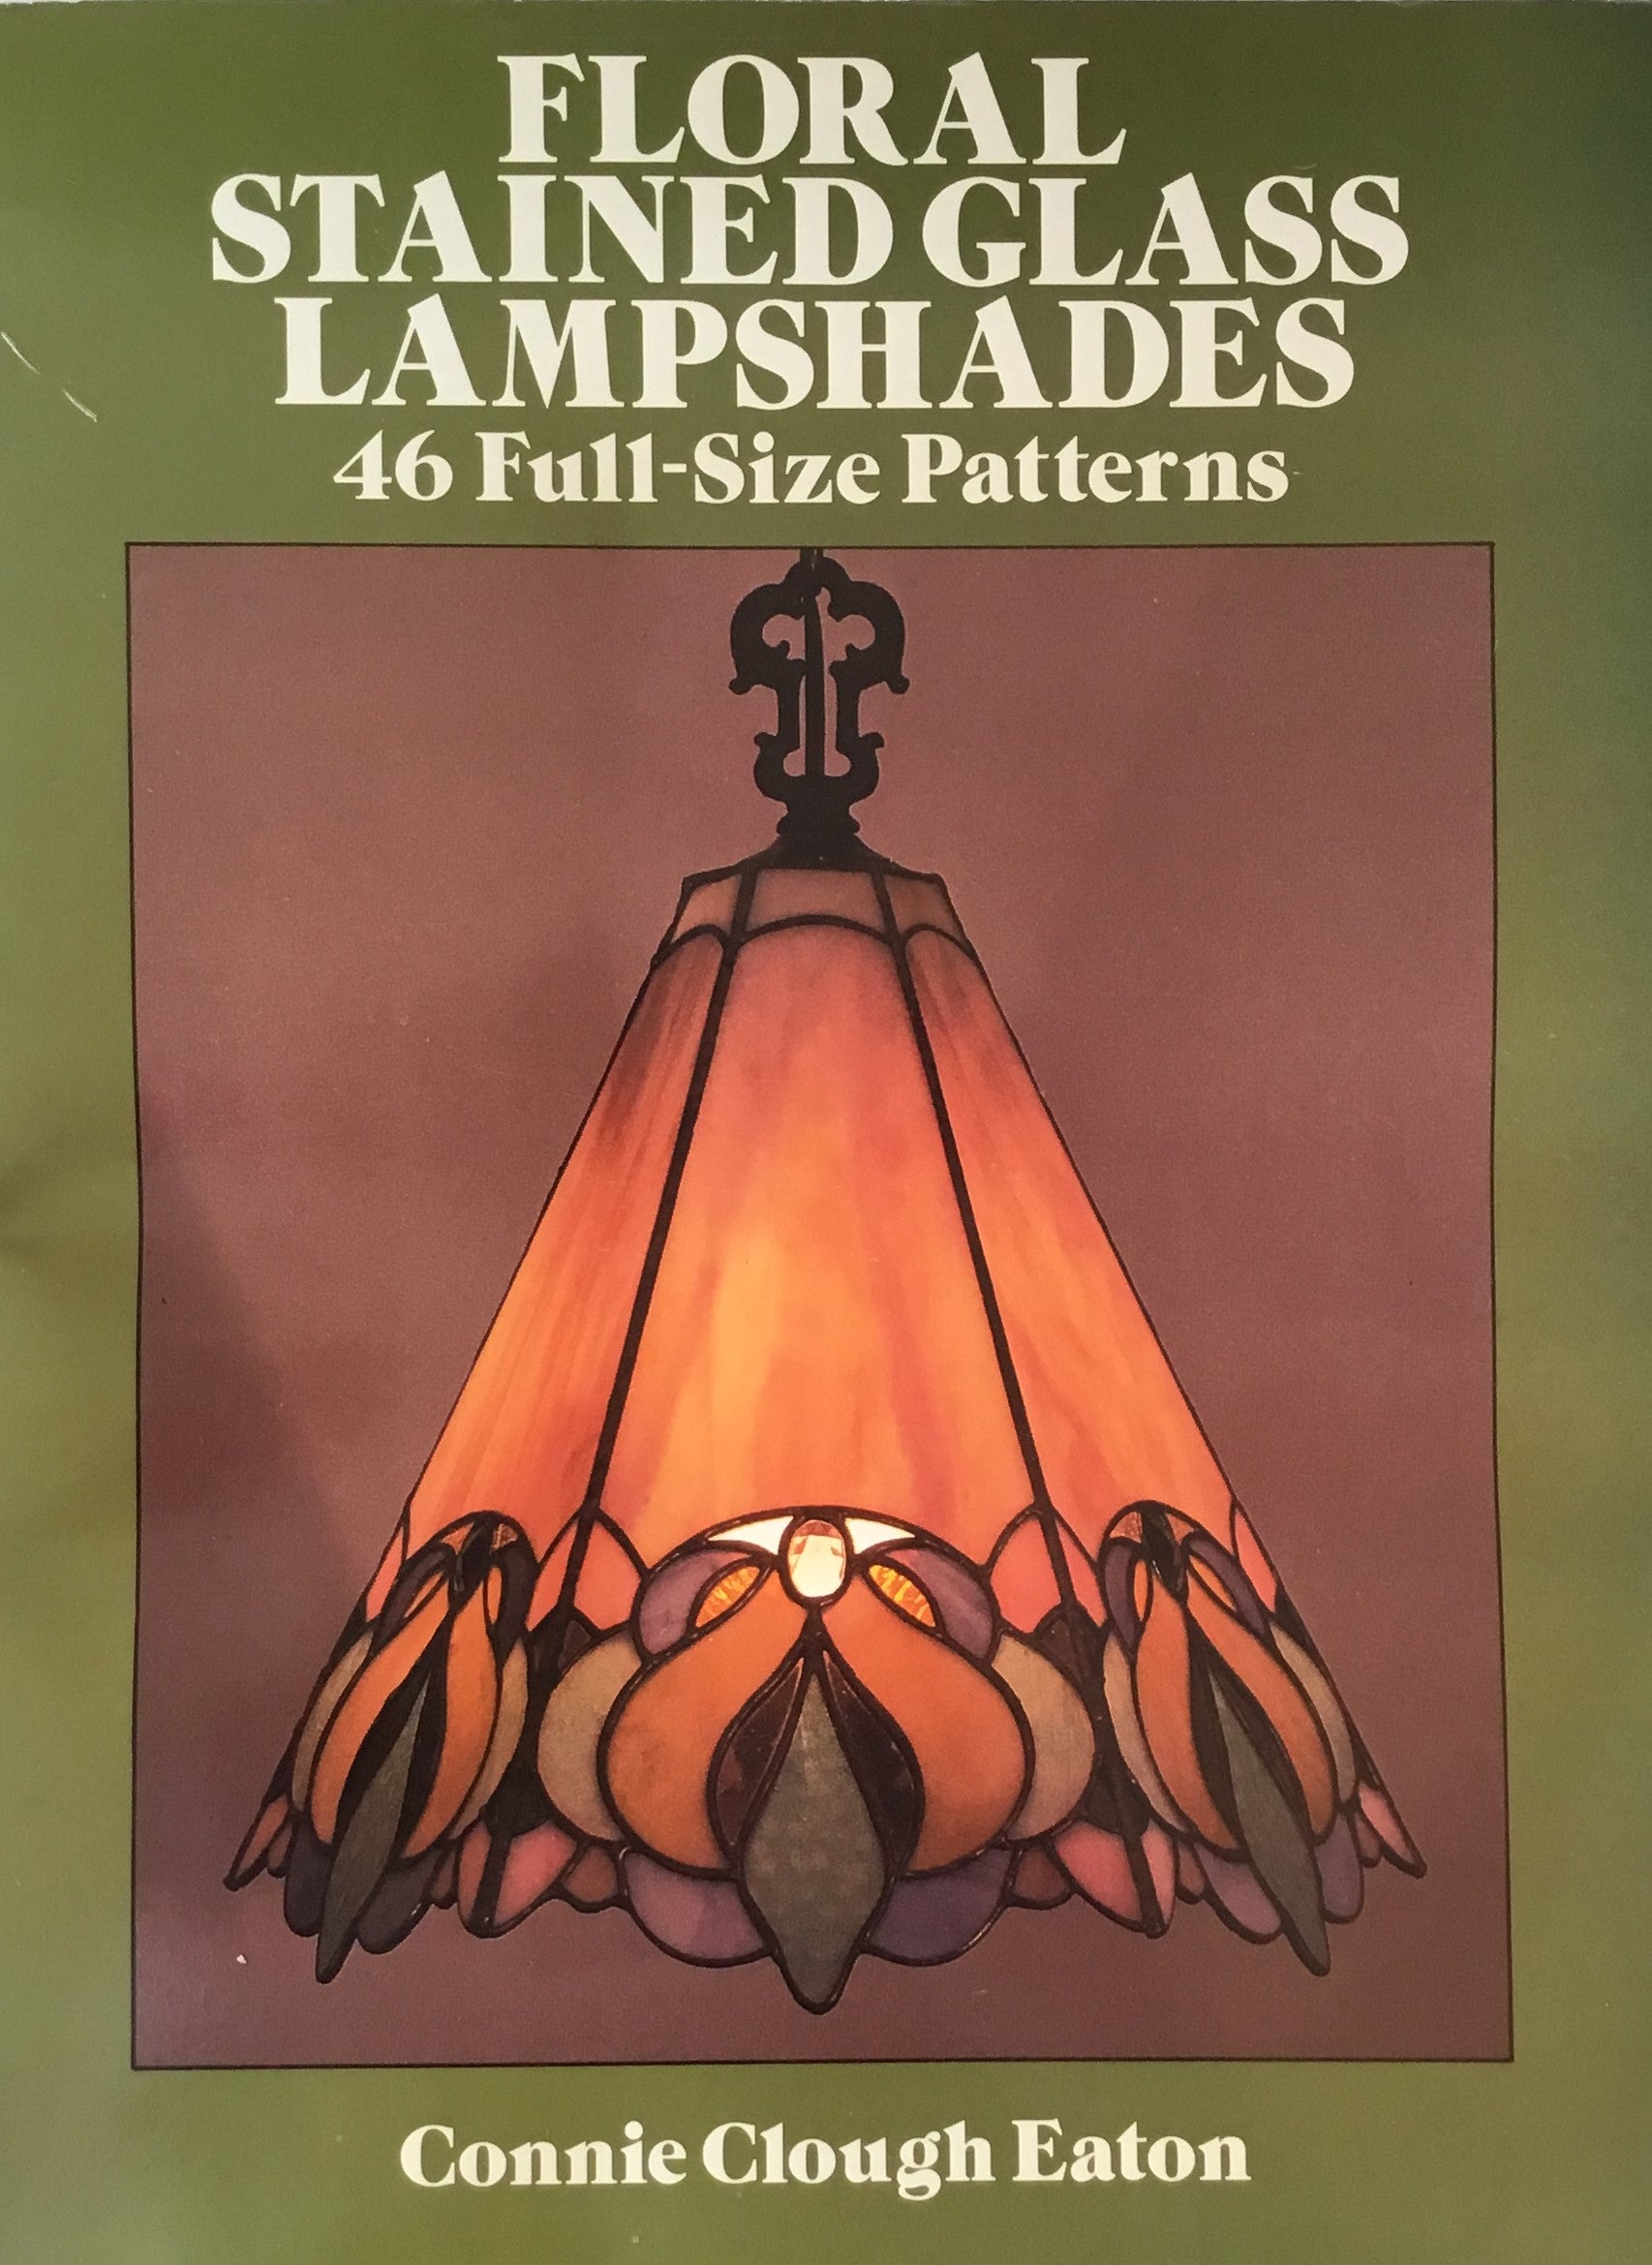 Floral Stained Glasss Lampshades　46Full-Size Patterns　Connie Clough Eaton　Dover